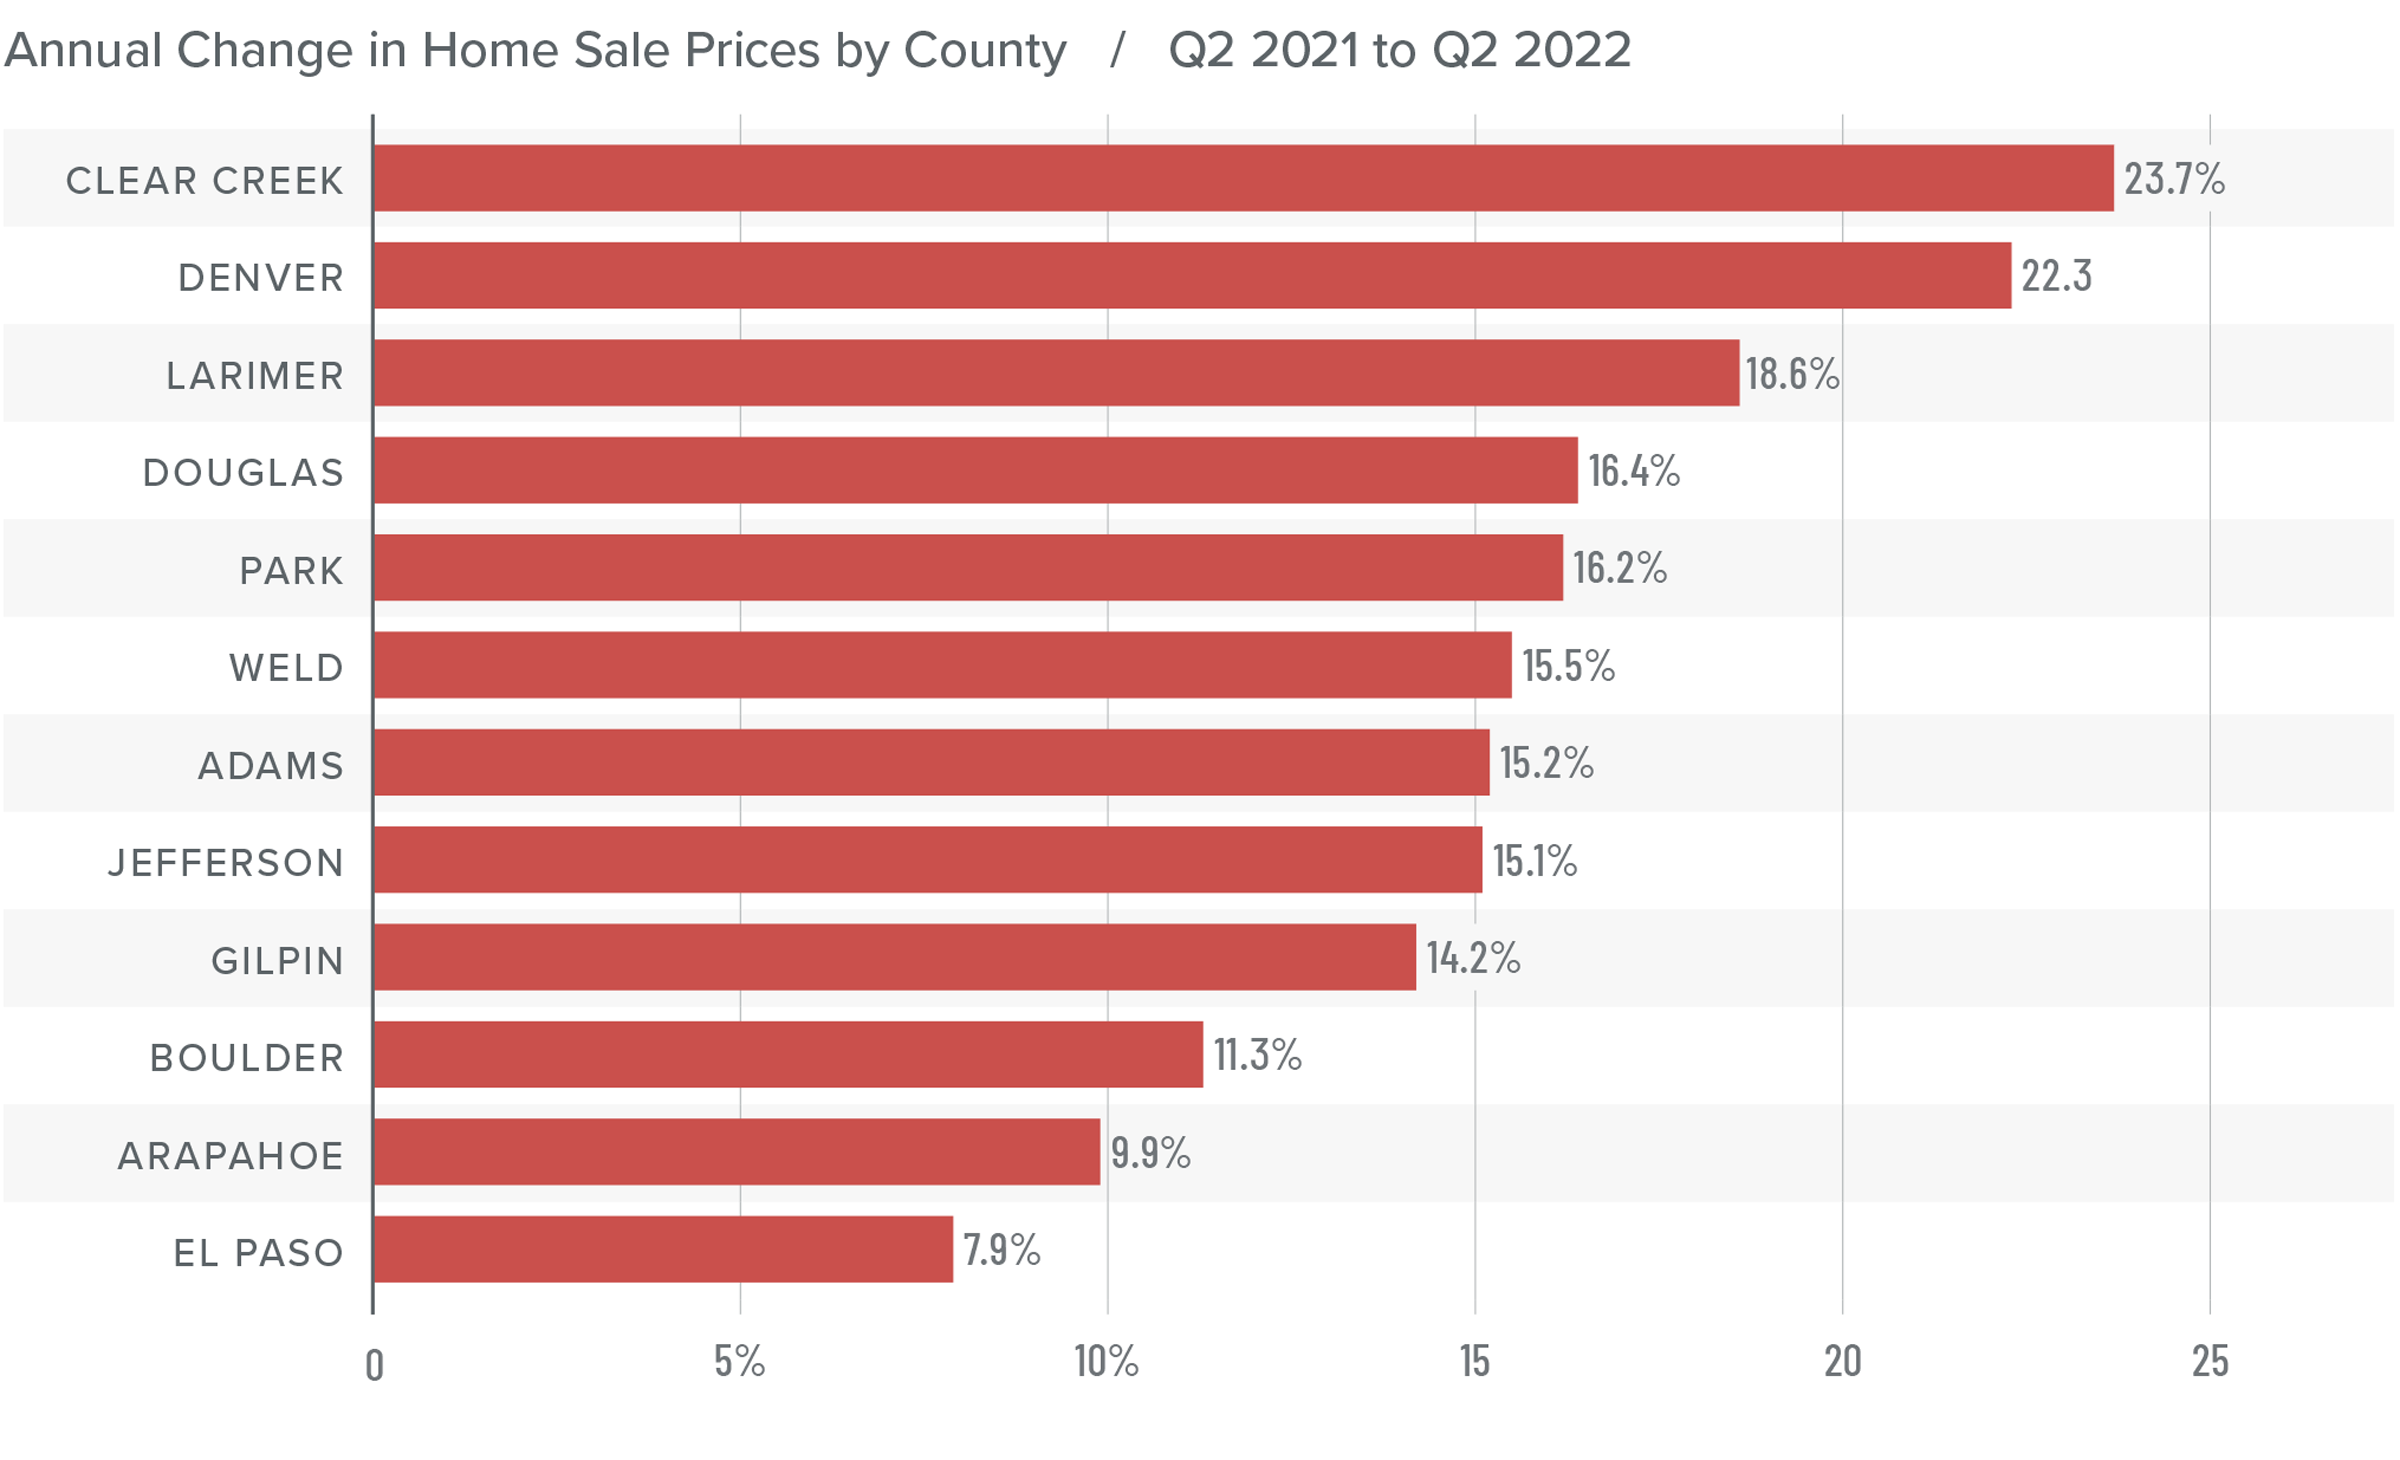 A bar graph showing the annual change in home sale prices for various counties in Colorado from Q2 2021 to Q2 2022. Clear Creek County tops the list at 23.7%, followed by Denver at 22.3%, Larimer at 18.6%, Douglas at 16.4%, Park at 16.2%, Weld at 15.5%, Adams at 15.2%, Jefferson at 15.1%, Gilpin at 14.2%, Boulder at 11.3%, Arapahoe at 9.9%, and finally El Paso at 7.9%.